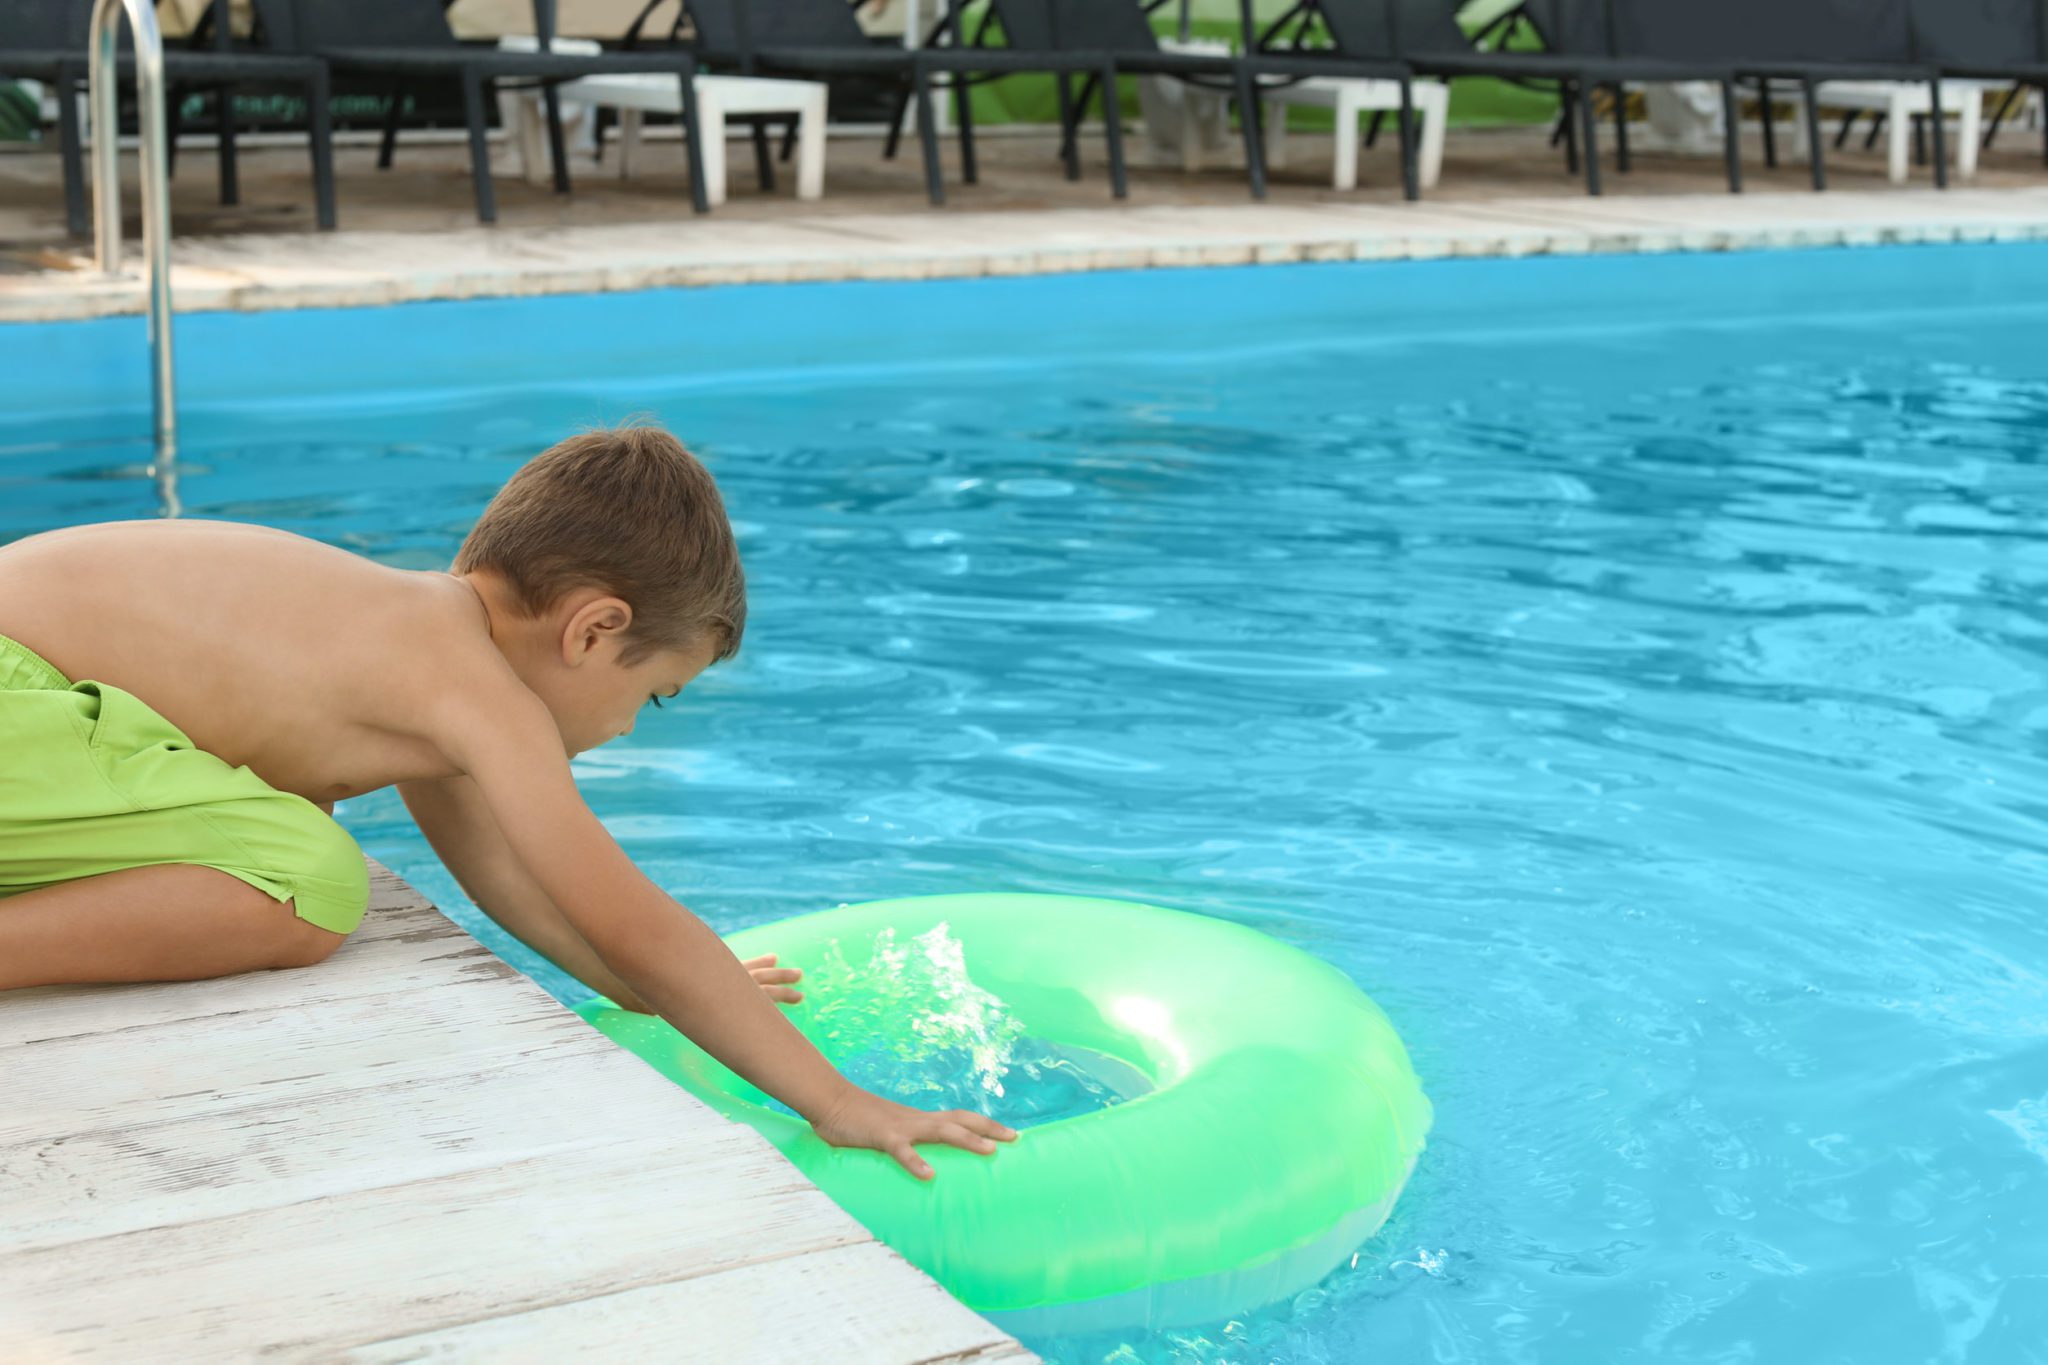 South Florida Swimming POol Accidents Lawyer